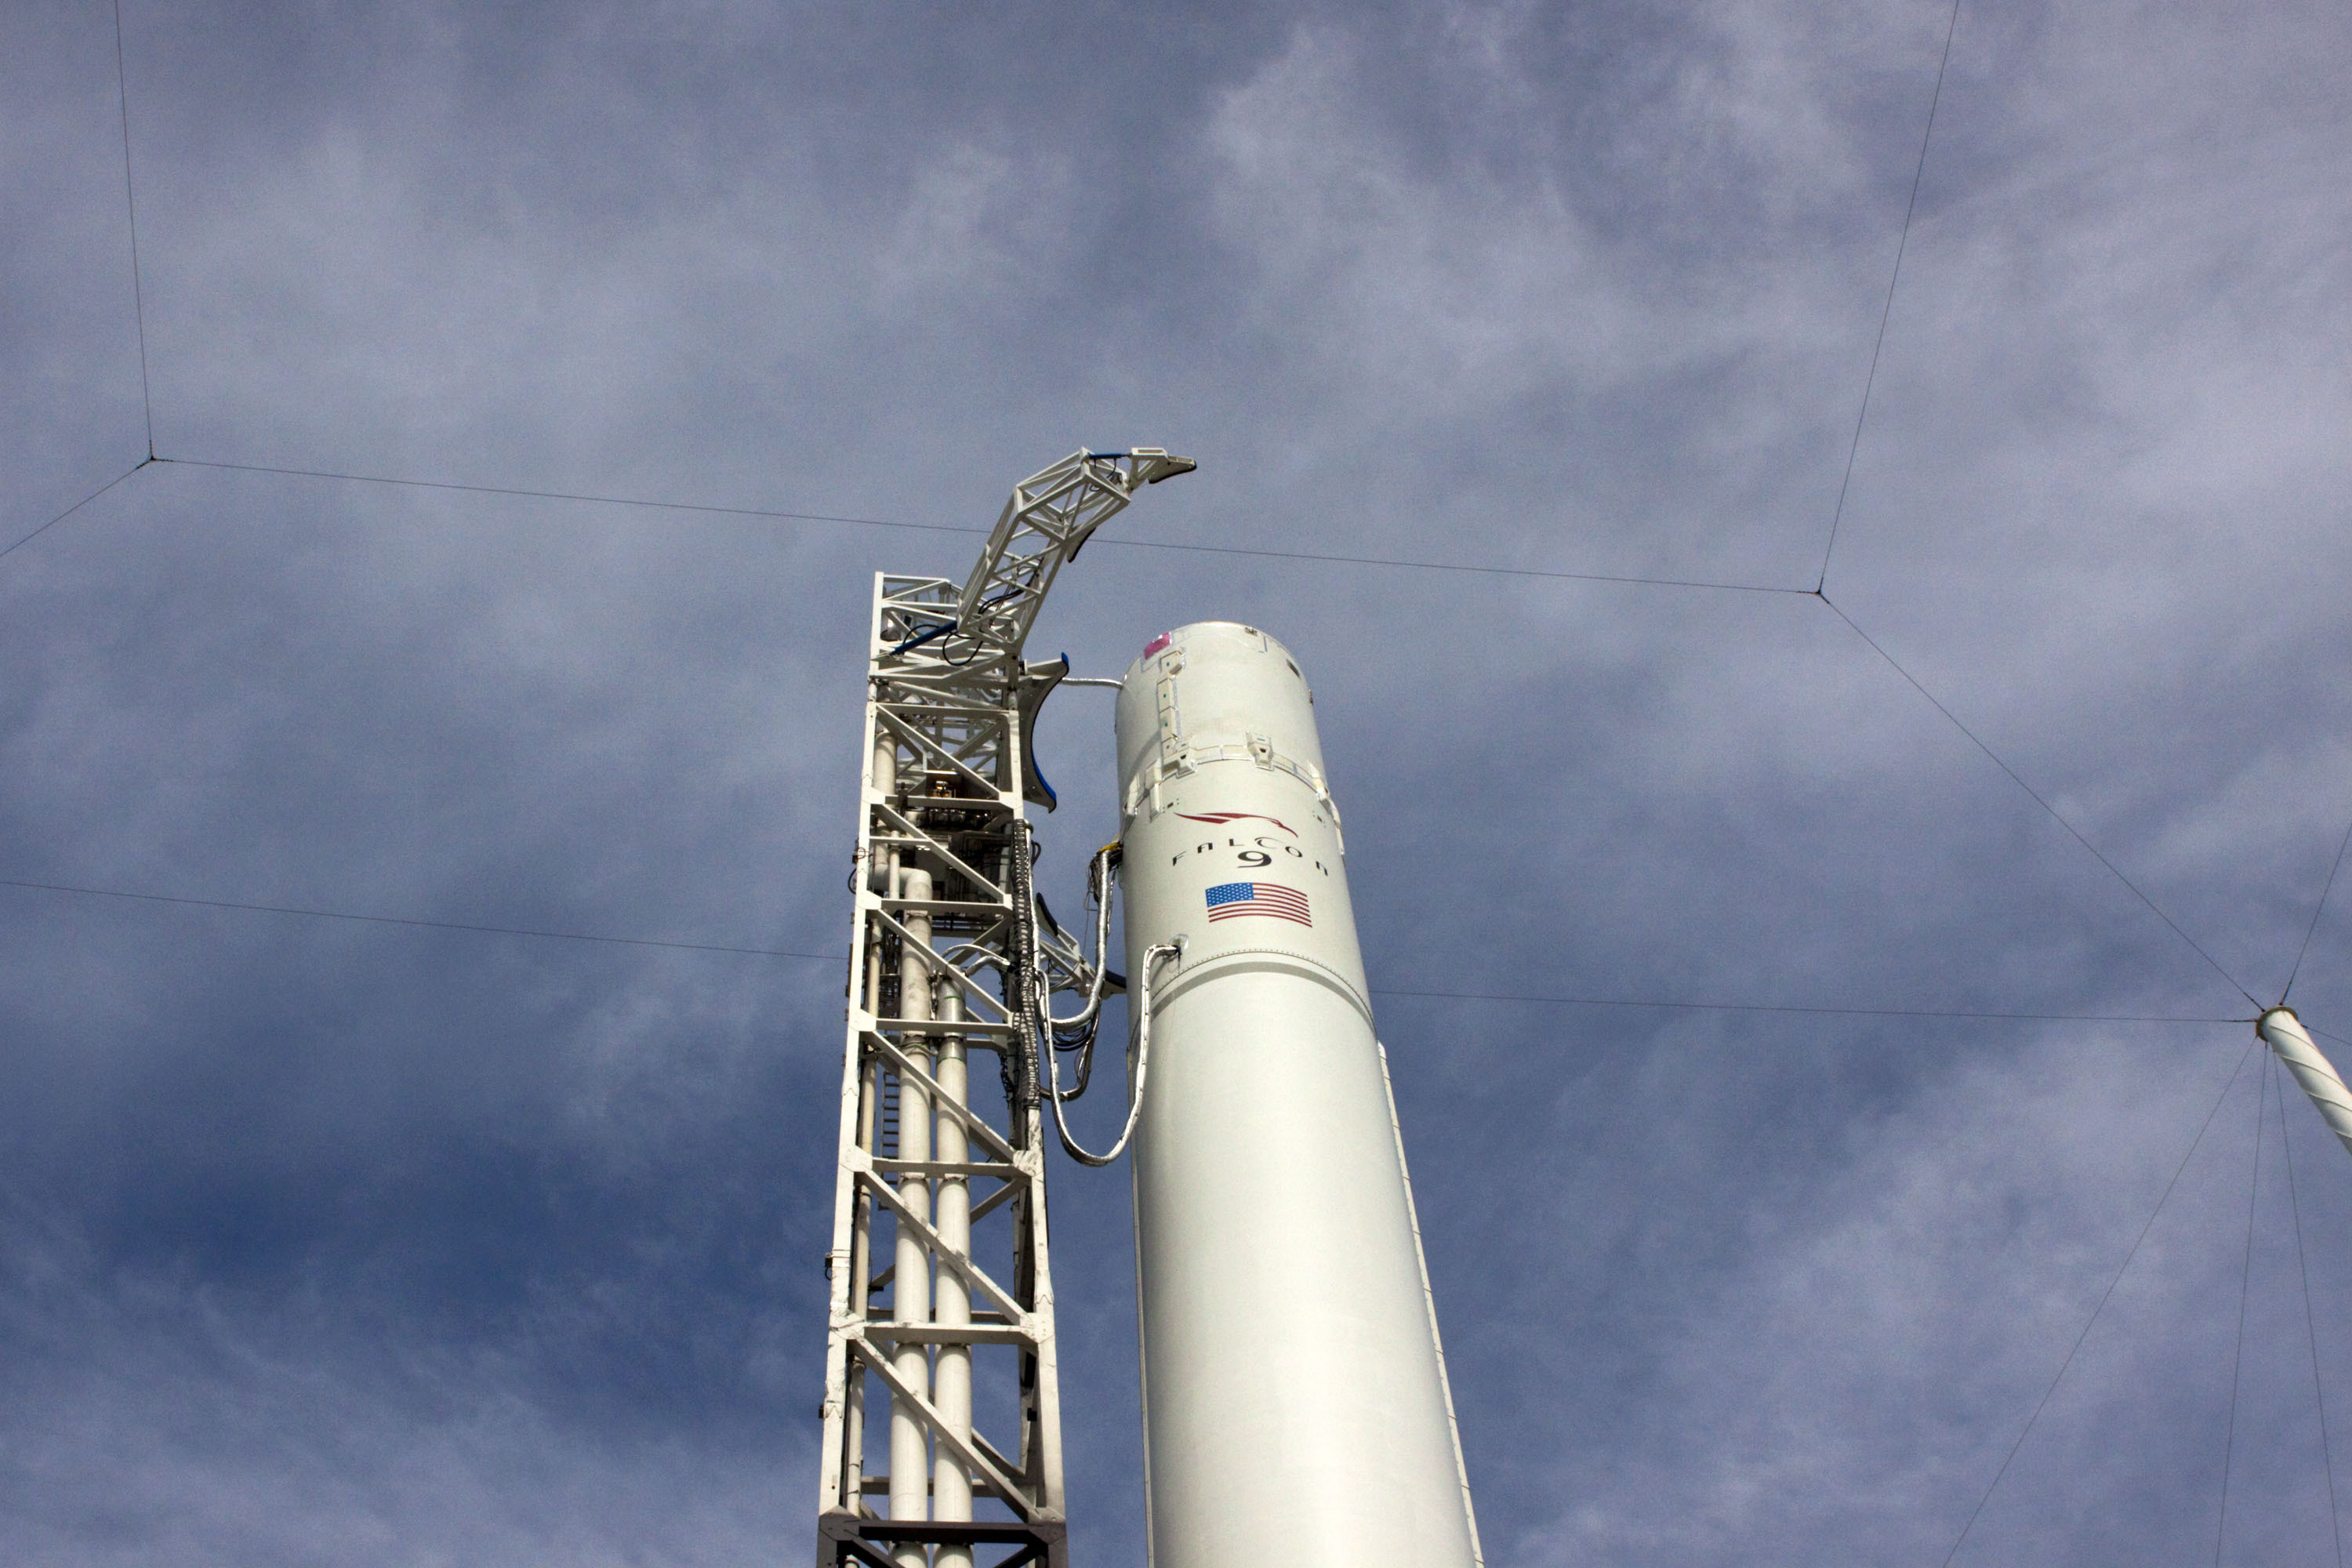 Upper arms of the Launch and erection tower open after erection